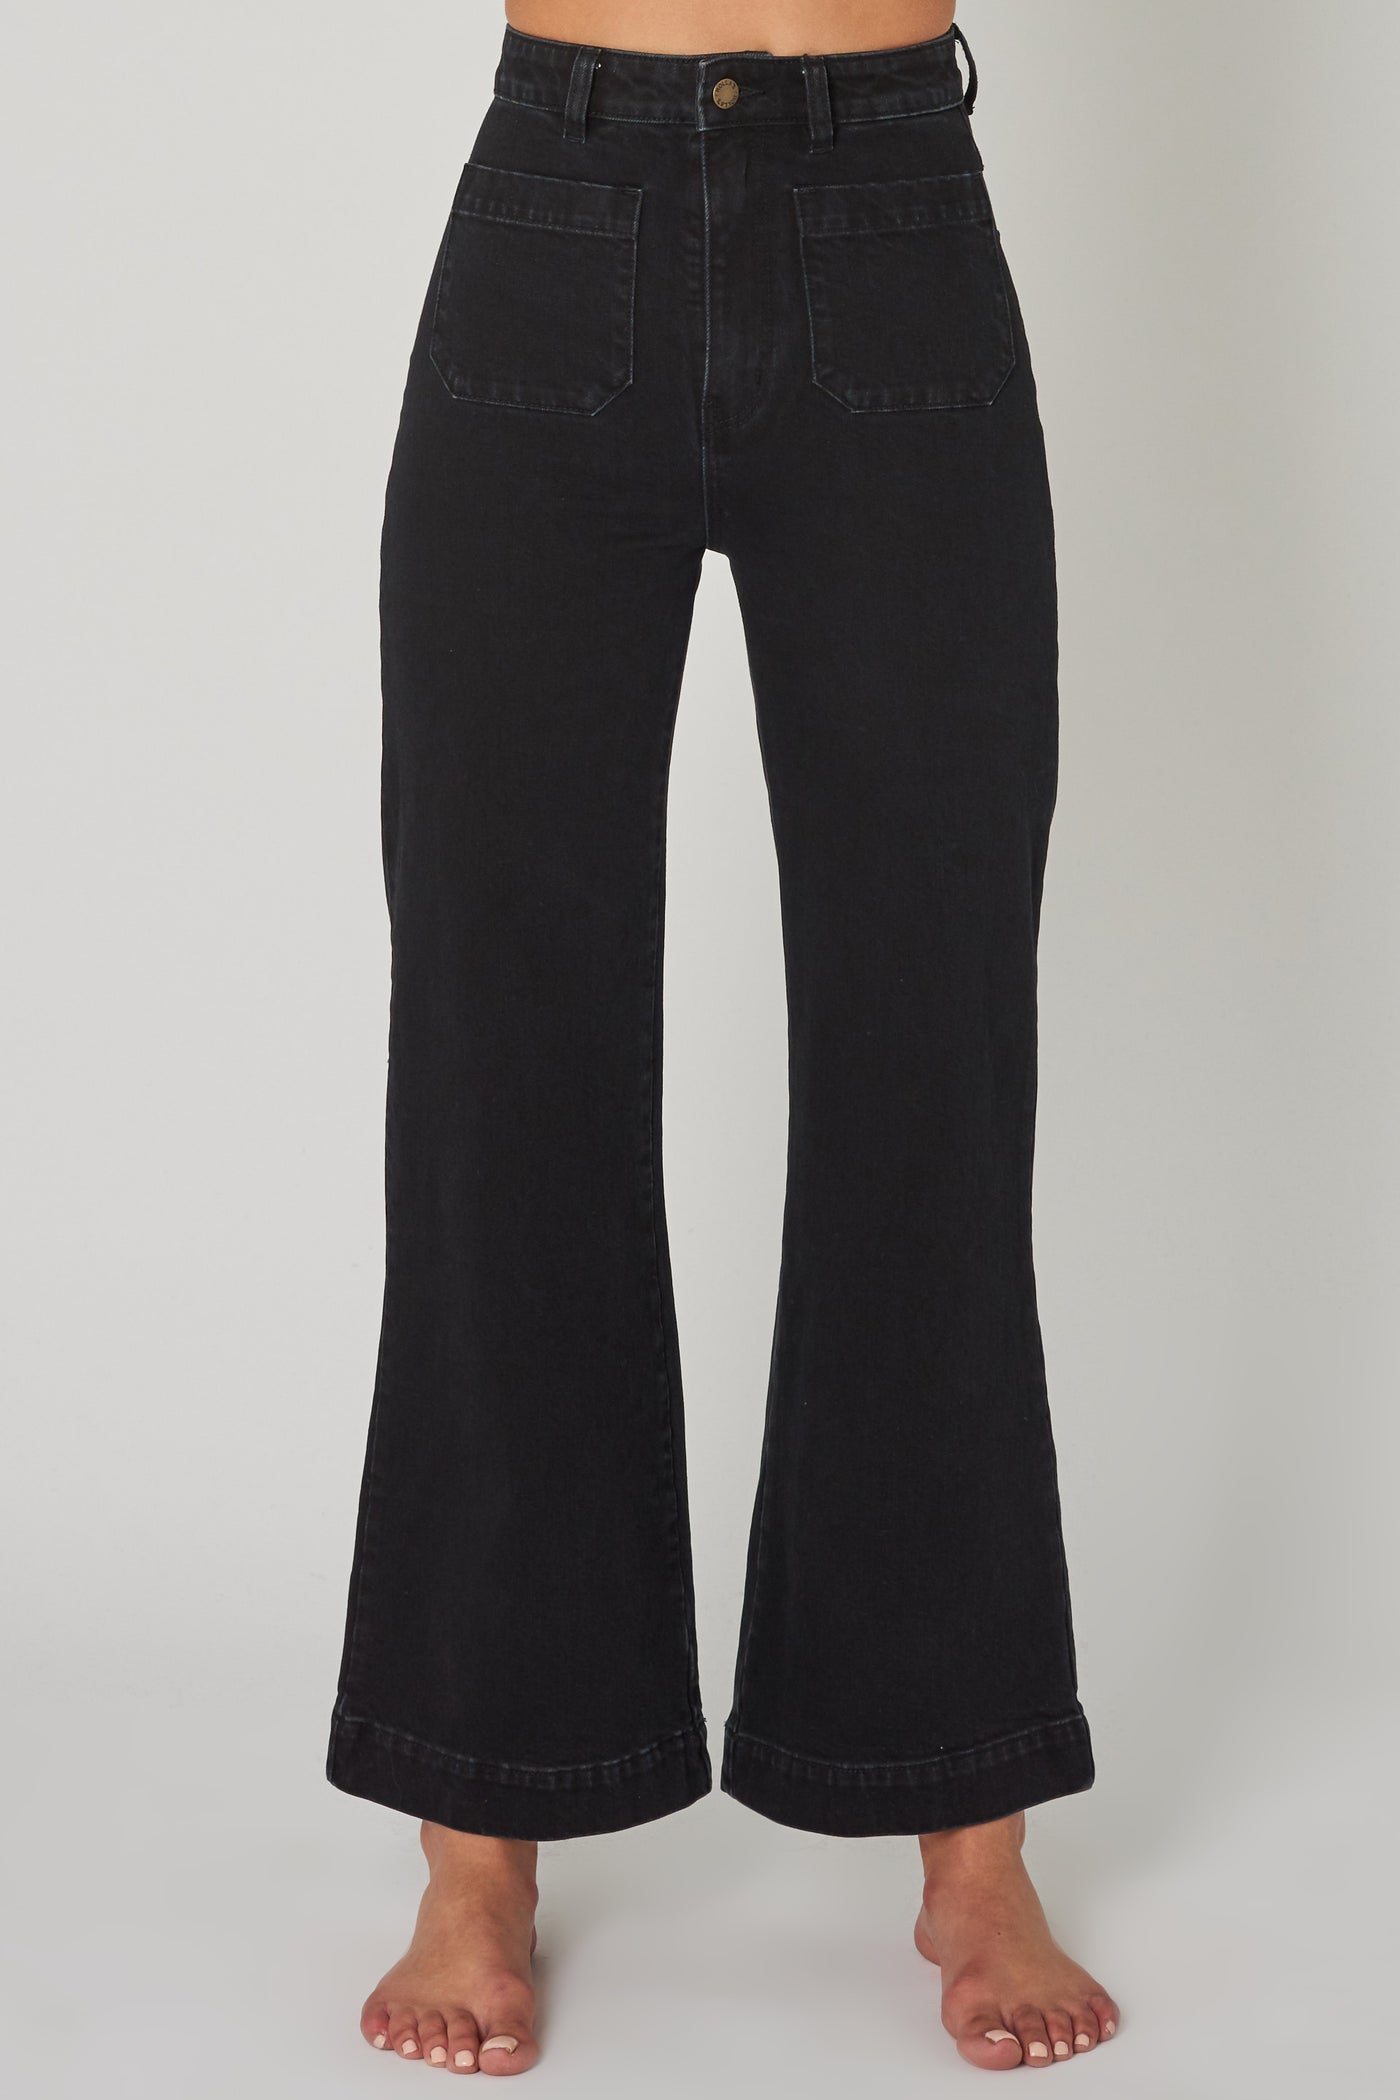 ROLLAS WOMENS SAILOR JEAN - COMFORT JET BLACK  The Rollas Sailor Jeans are now available in Comfort Jet Black, and are a stylish modernised take on classic flares. The Sailor Jeans have a high-waist, and feature a classic zip-to-button closure, with two functional 'sailor style' pockets at the front, and classic signature Rollas branded pockets at the back, finished with wide flared legs. Simple, stylish and easy to wear, team the Rollas Sailor Jeans back with any of your favourite tops this season.